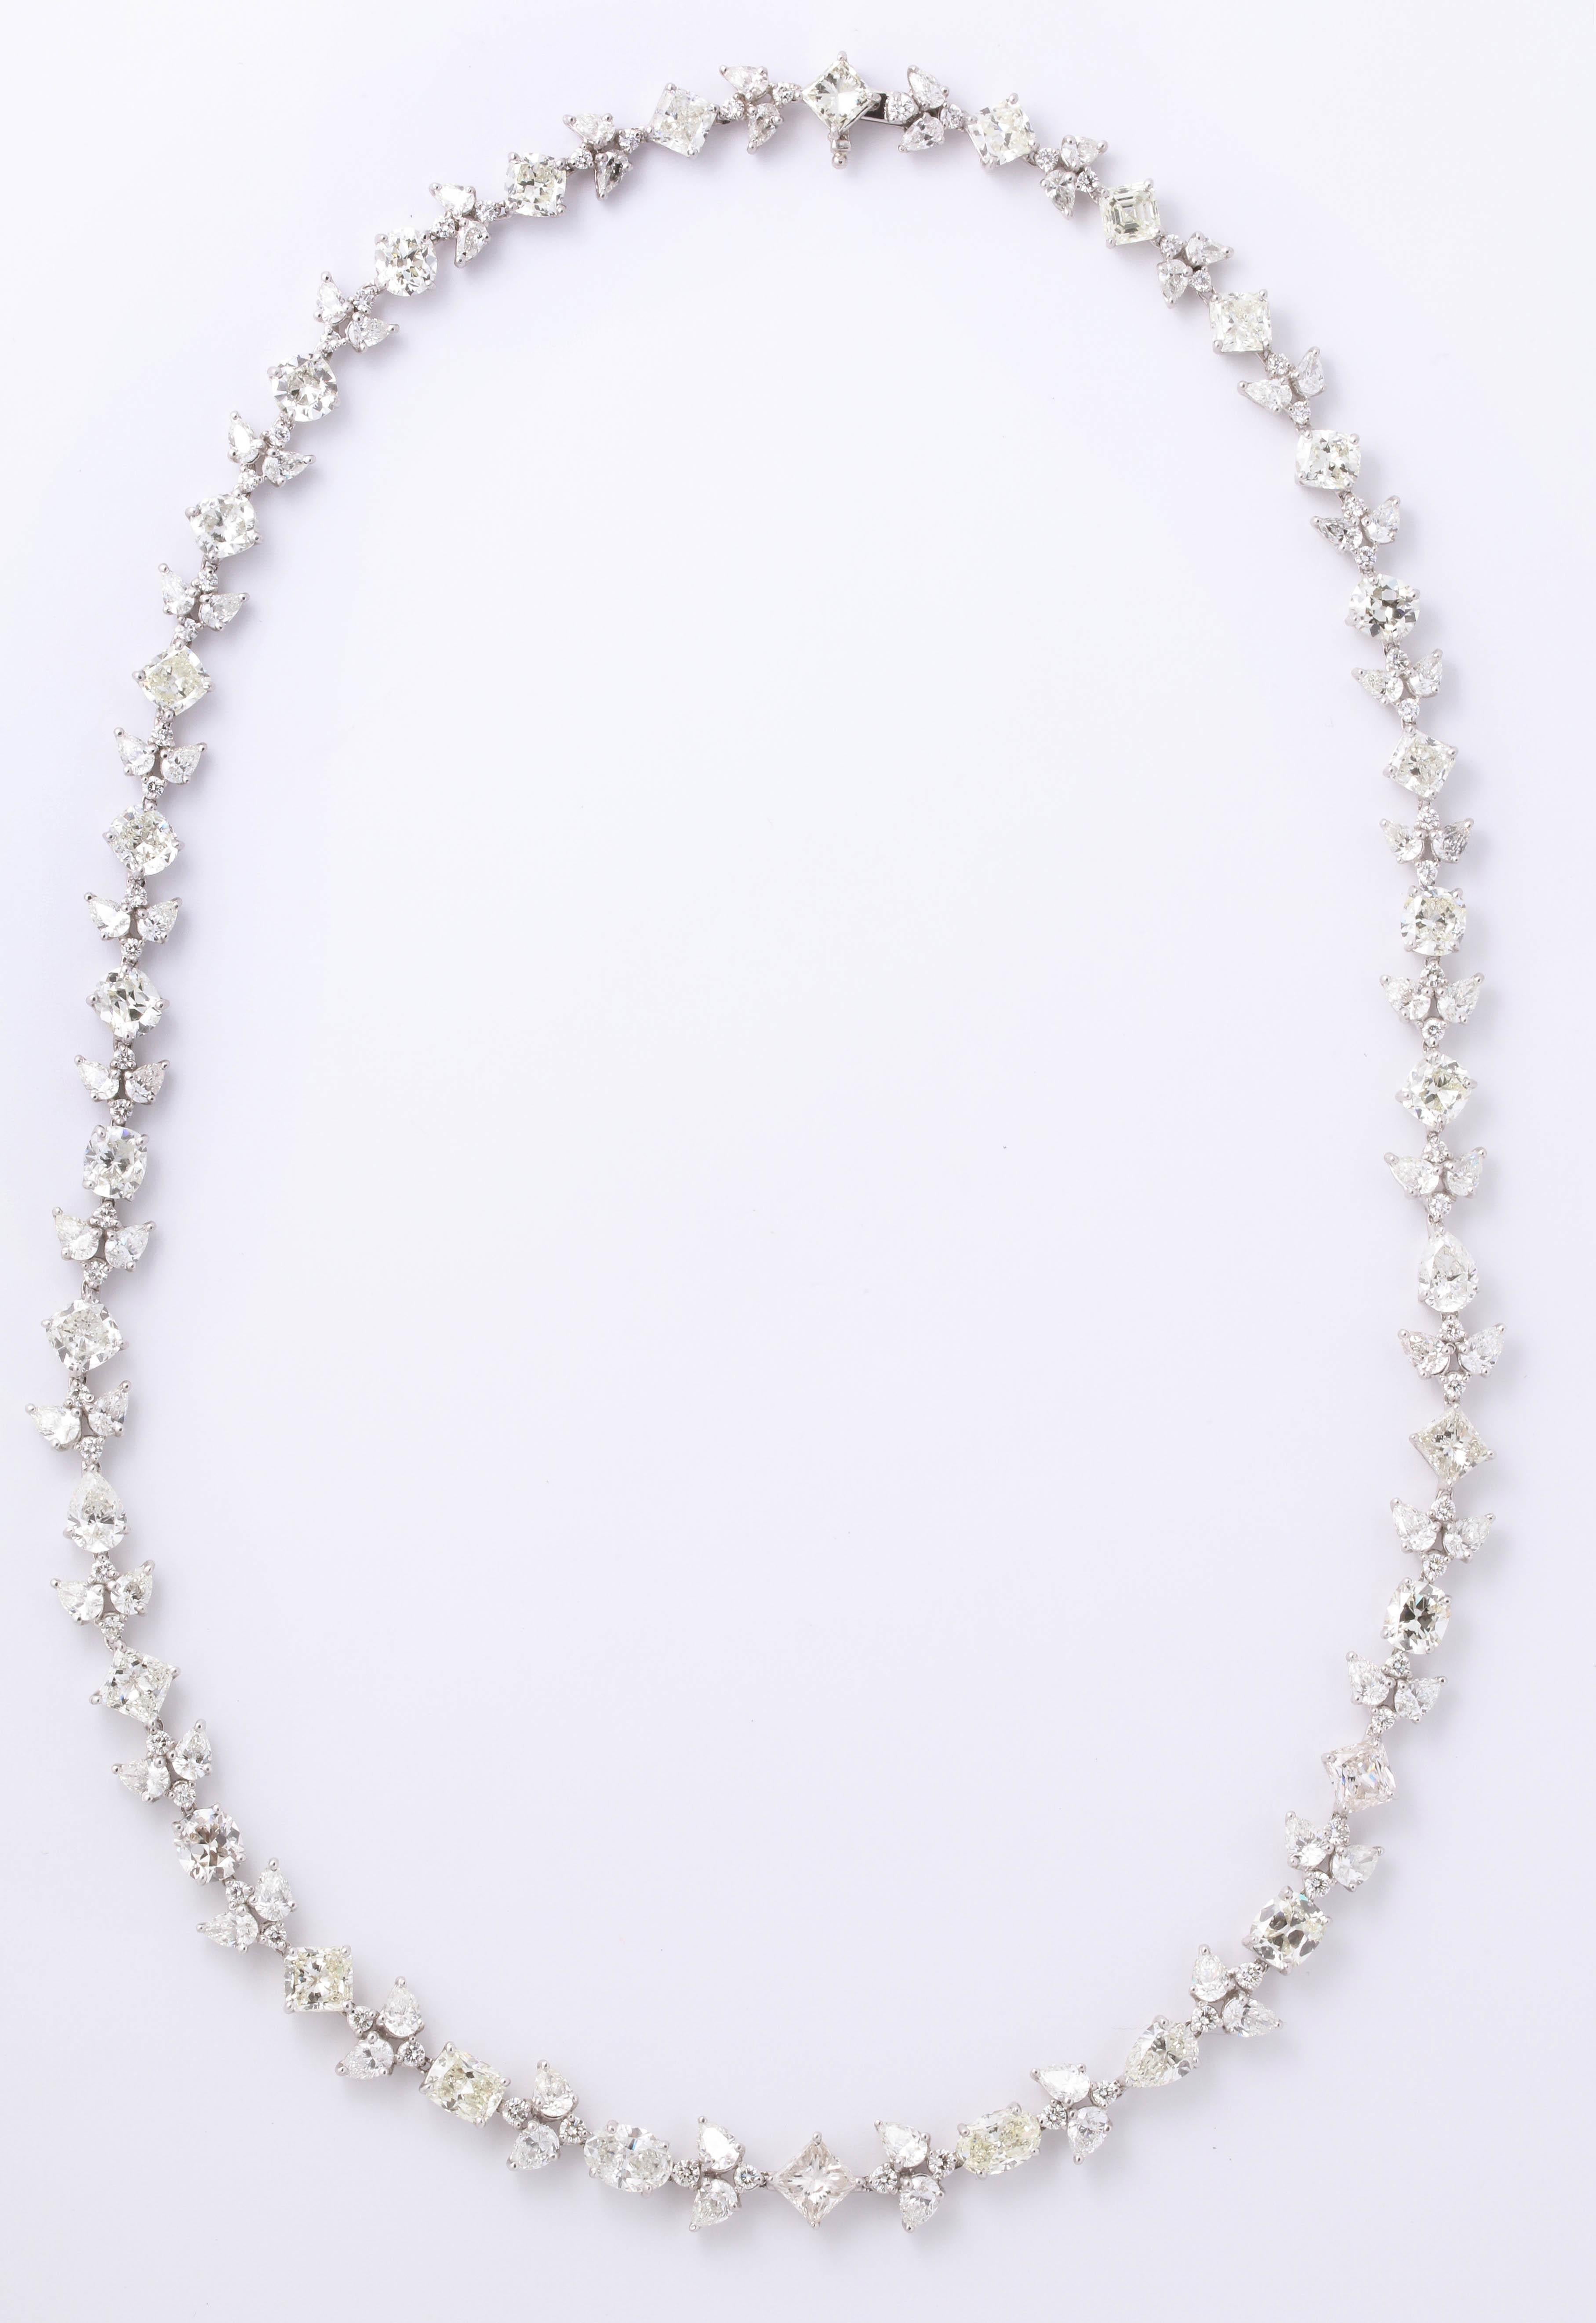 
A FABULOUS 20.5 inch Diamond Necklace!

53.61 carats of princess, cushion, oval, pear, round and asscher cut diamonds.

An incredible necklace that makes a statement all by itself or can be used to hang an important pendant.

Set in Platinum